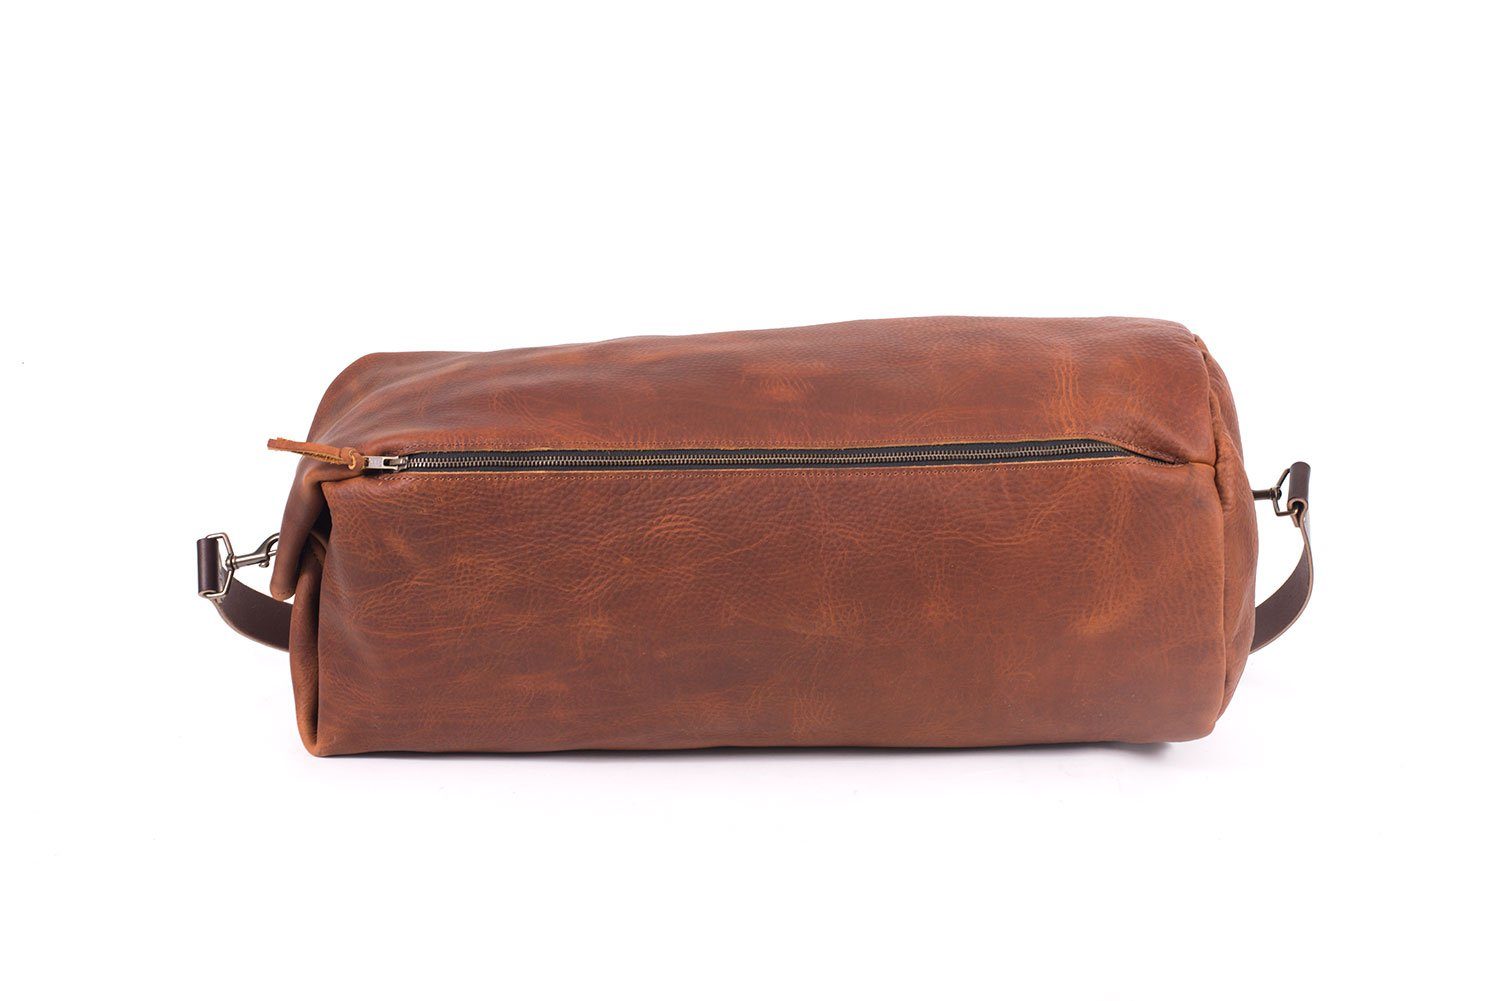 Leather Duffle Bag Men Personalized Military Style Travel 